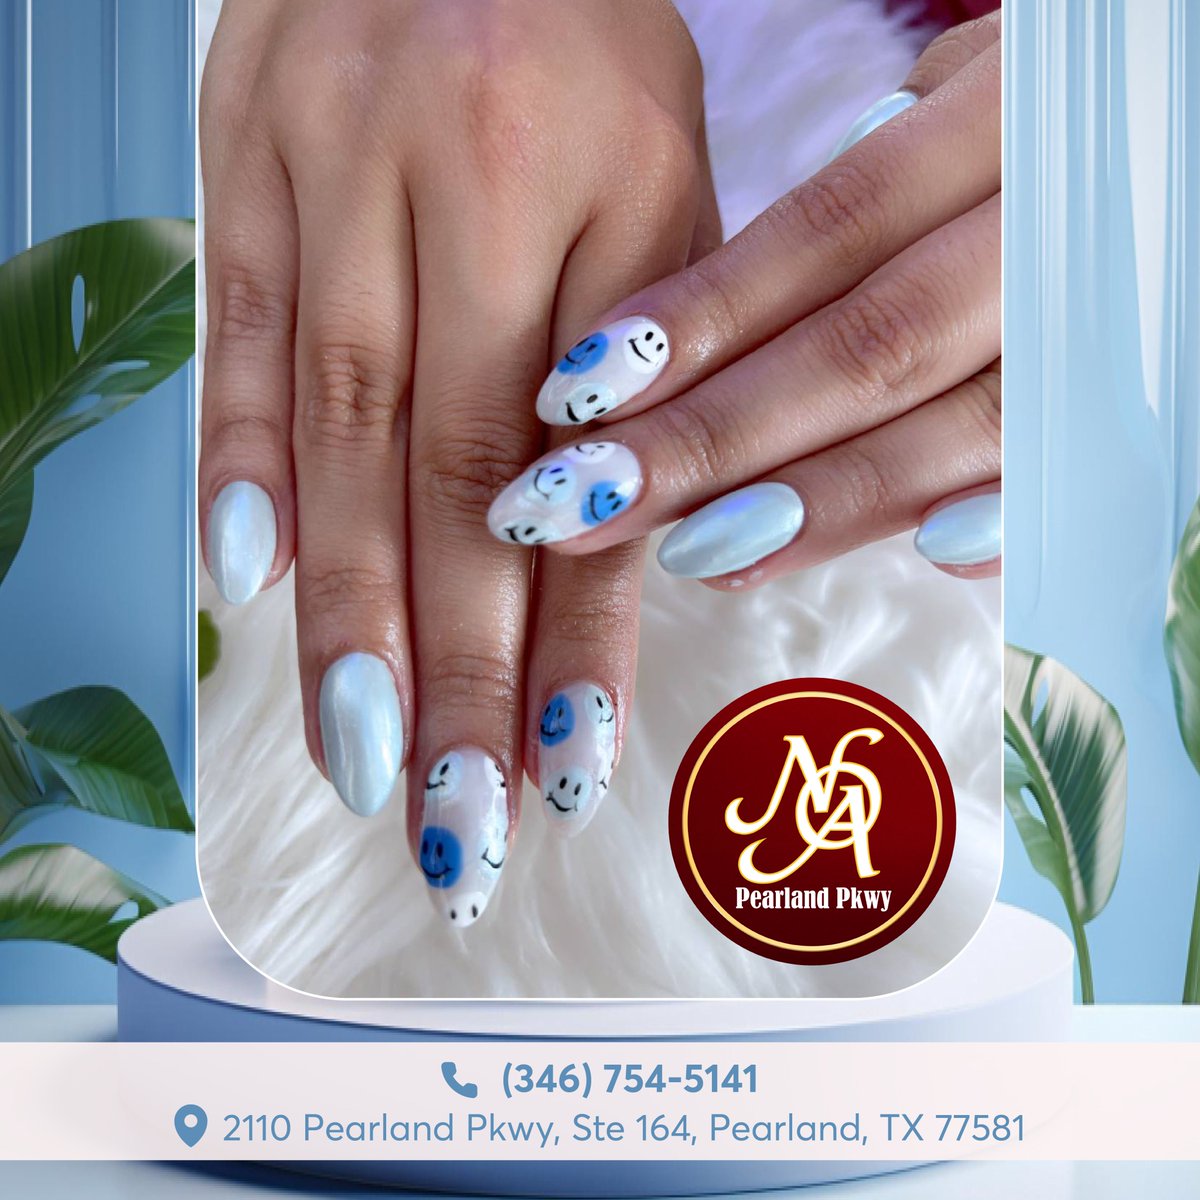 Click, clack, confidence attack! Your nails are ready to conquer the day. 💙✨
#nailsofamerica #nailsofamericapearland #nailsalonspearland #manicure #pedicure #spapearland #nailpolish #naillover #nailworld #NailStyle #nailfashion